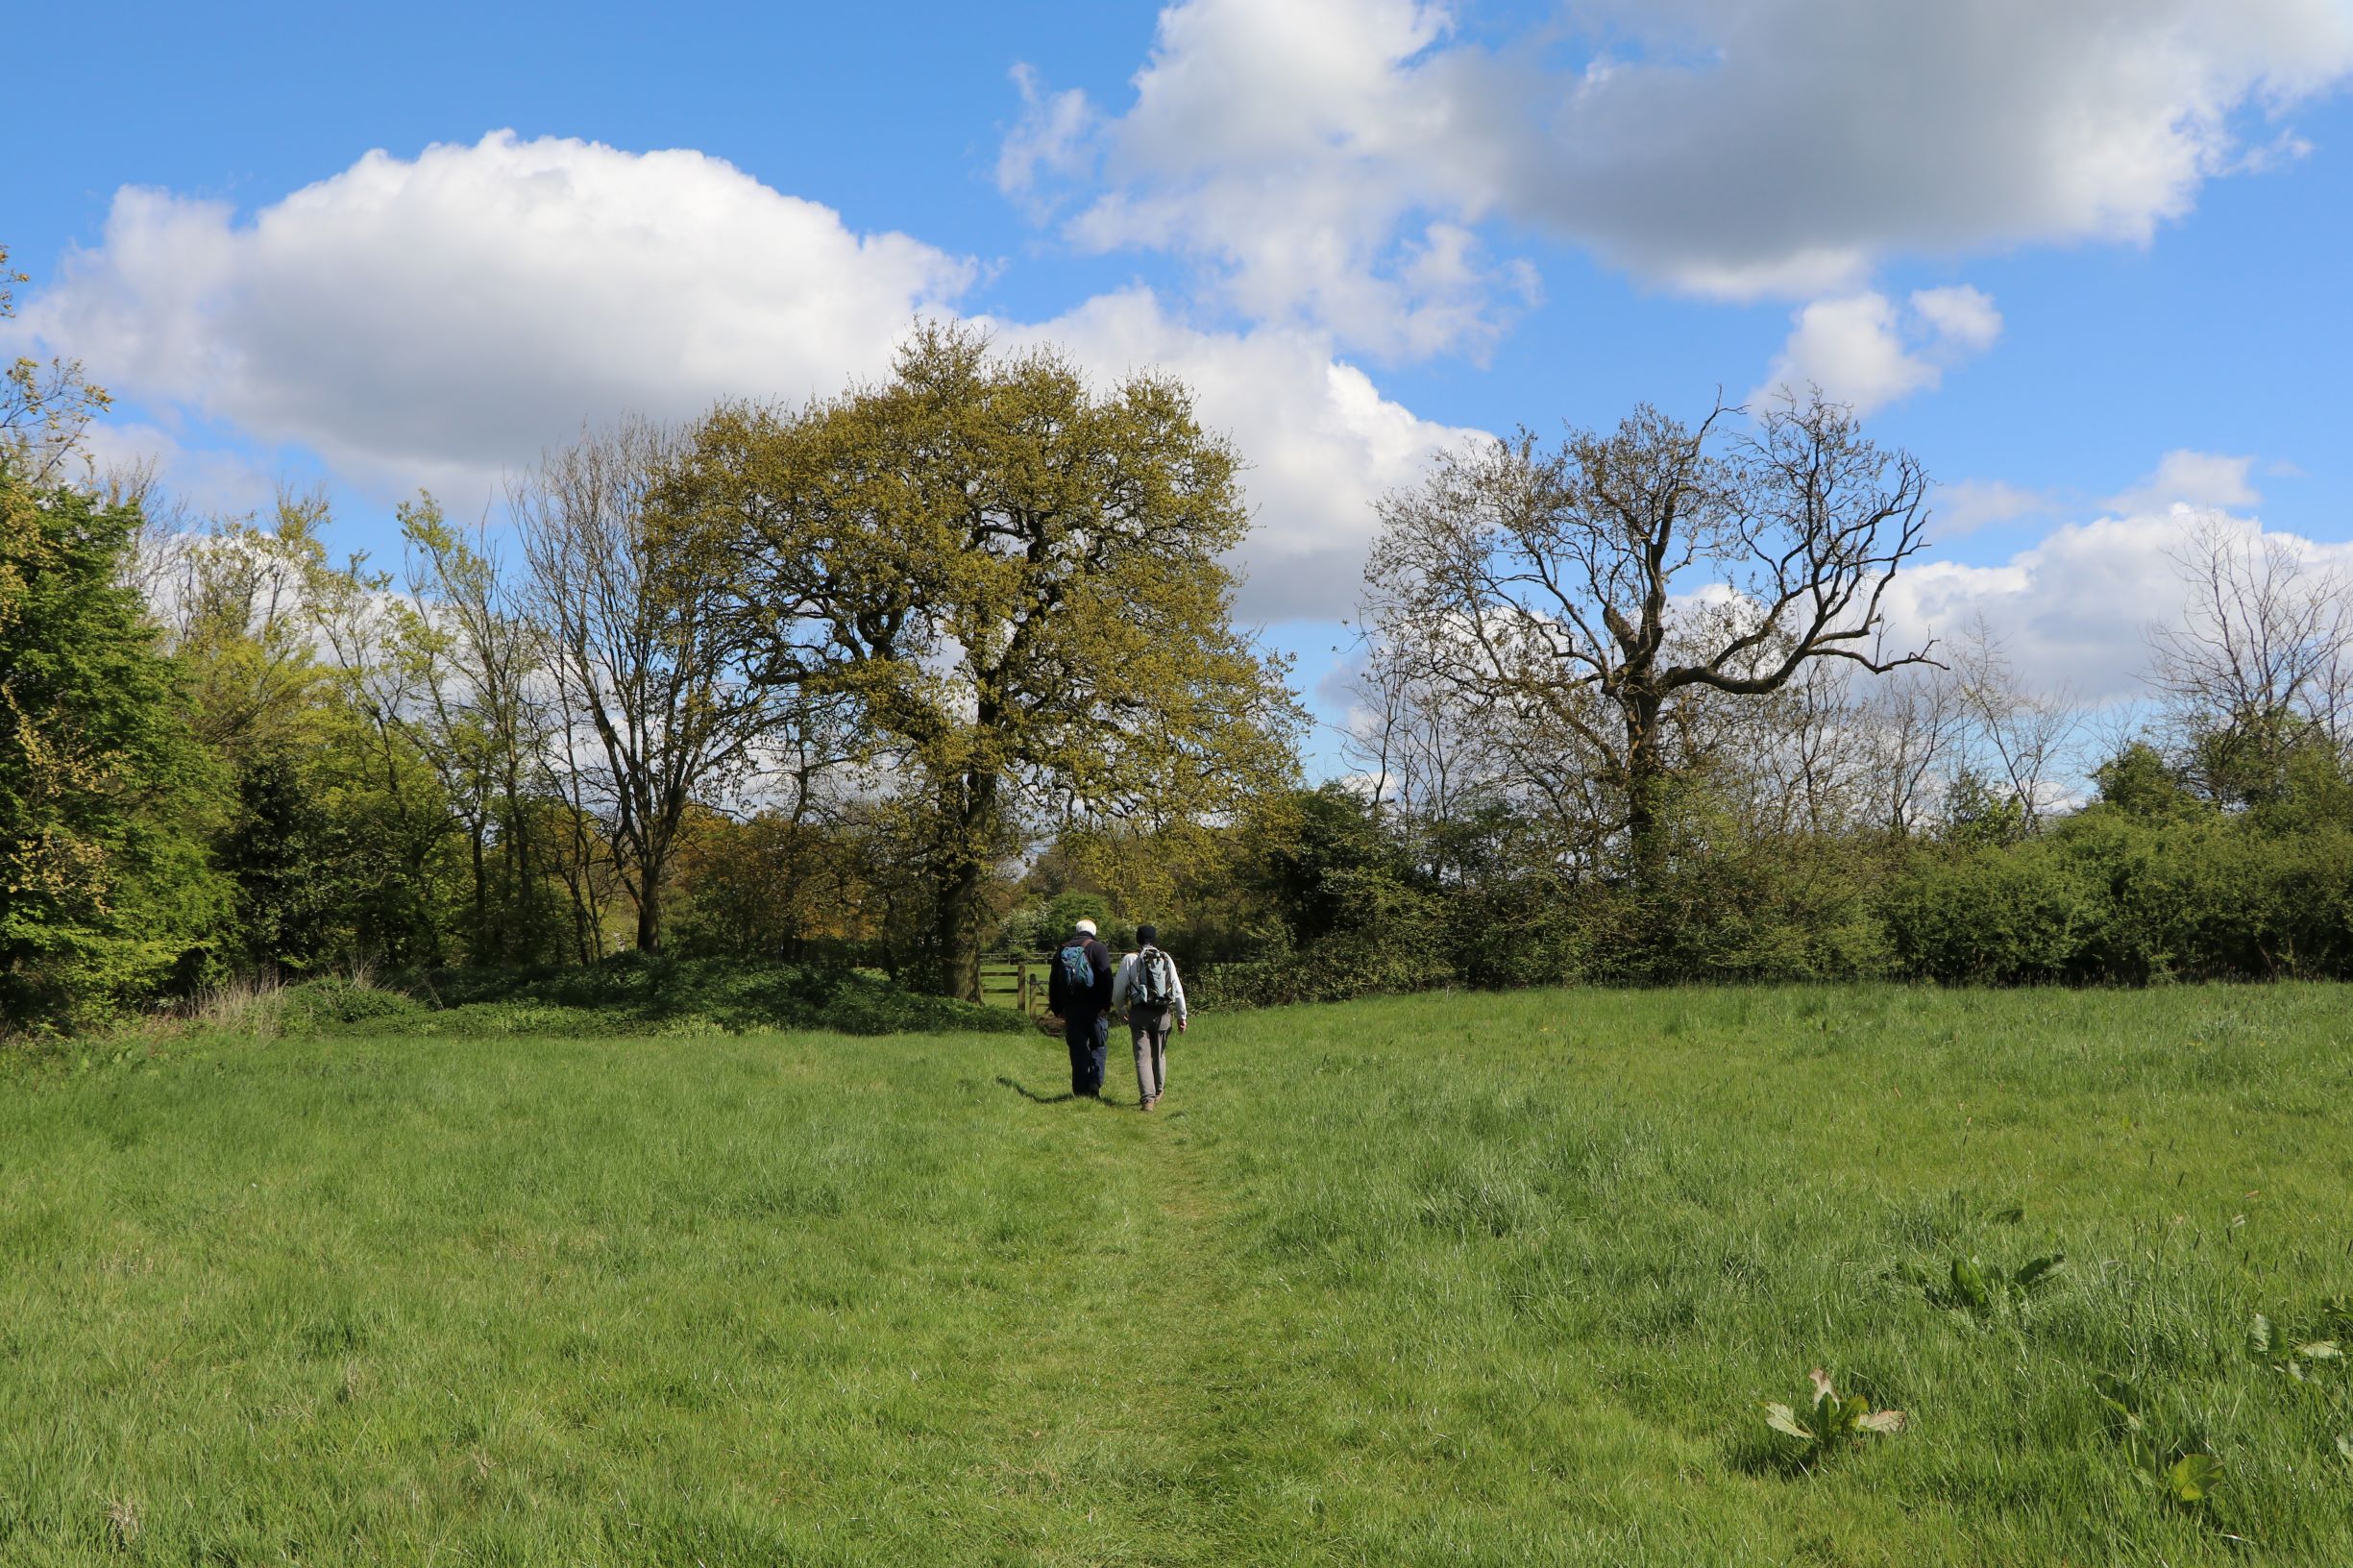 Two walkers in a green grassy field with trees in the background and a blue sky with puffy white clouds